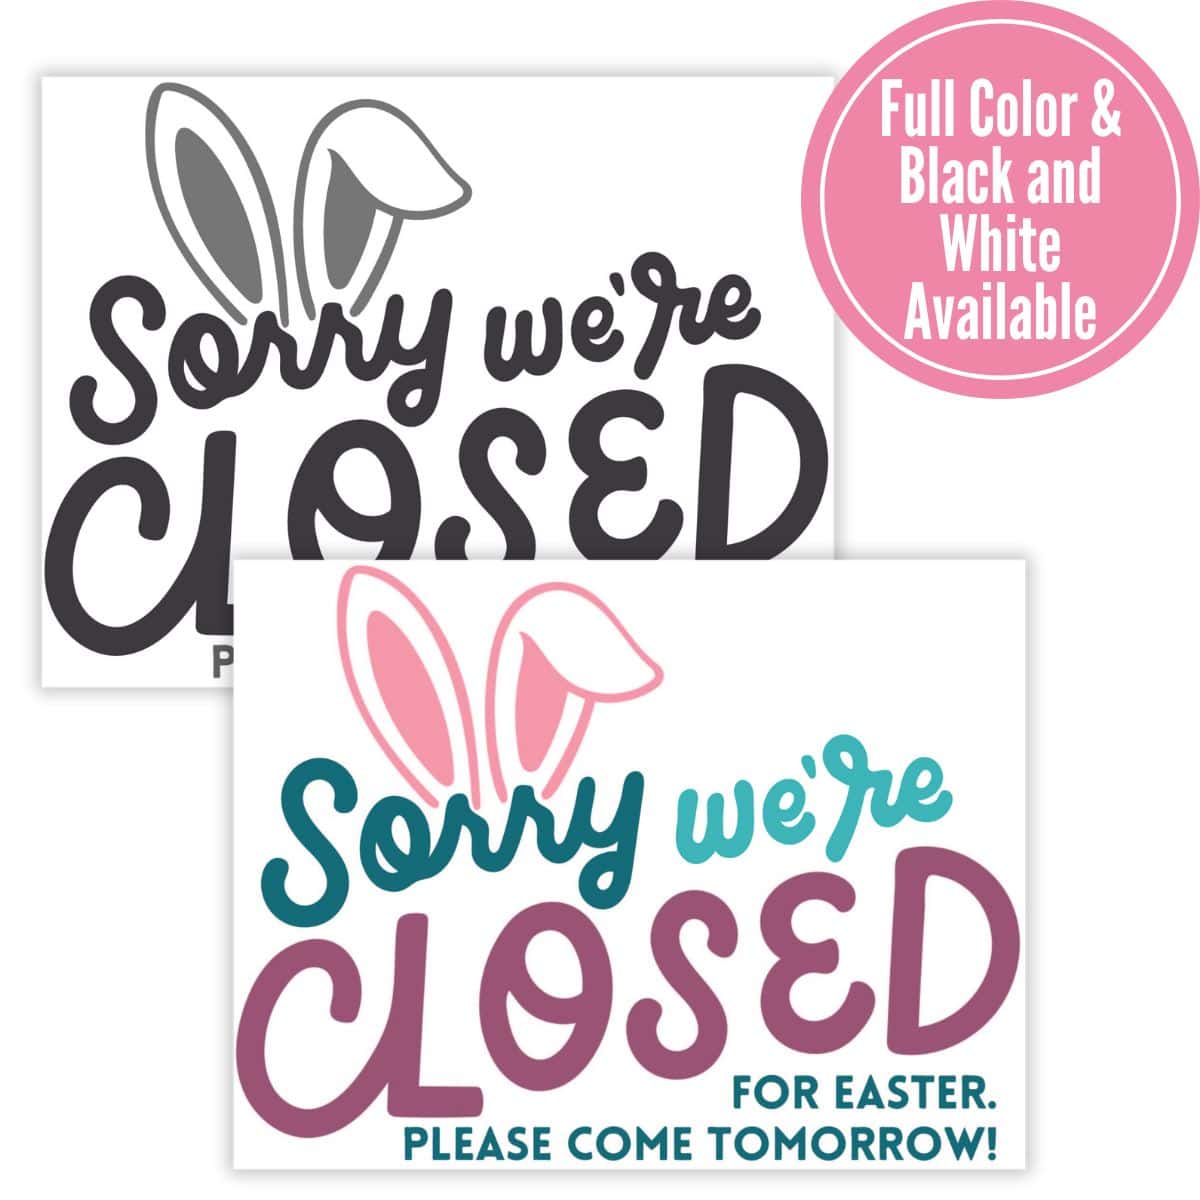 Closed for Easter Free Printable PDF	

			
		
	

		
			Free – Buy Now Checkout
							
					
						
							
						
						Added to cart